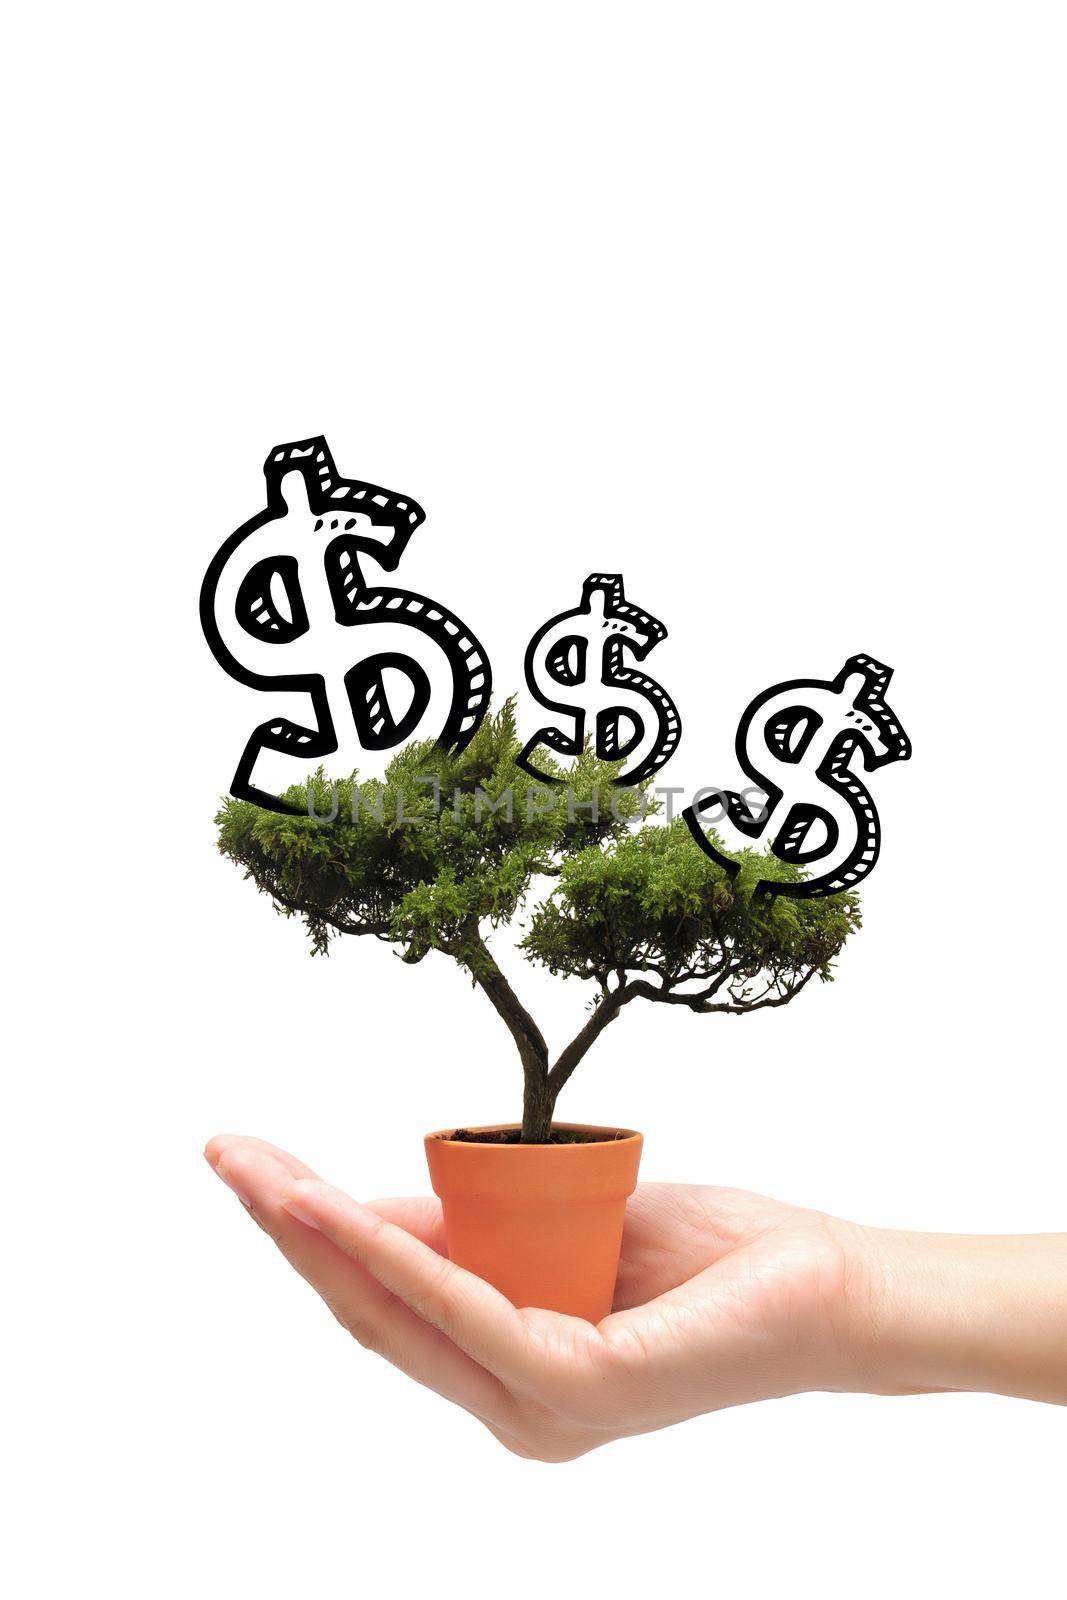 Business woman holding idea money tree in small pot on white background.Photo design for smart business, business idea and Financial growth concept. by Nuamfolio